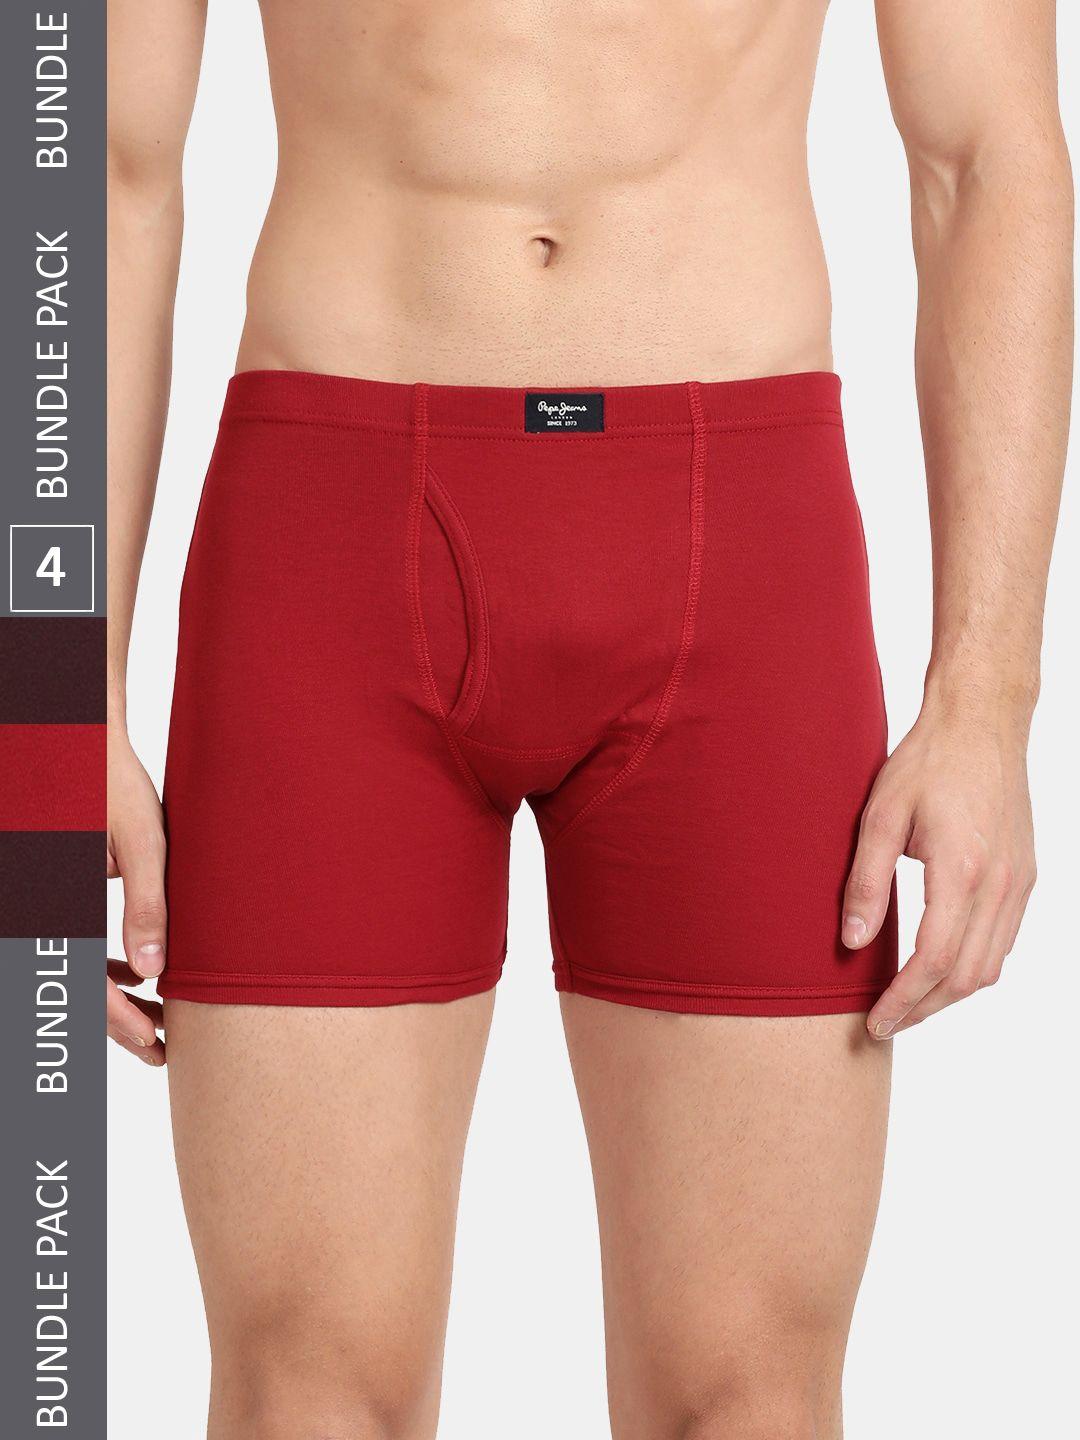 pepe-jeans-men-pack-of-4-regular-fit-cotton-trunks-clt01-burgand-parry-red